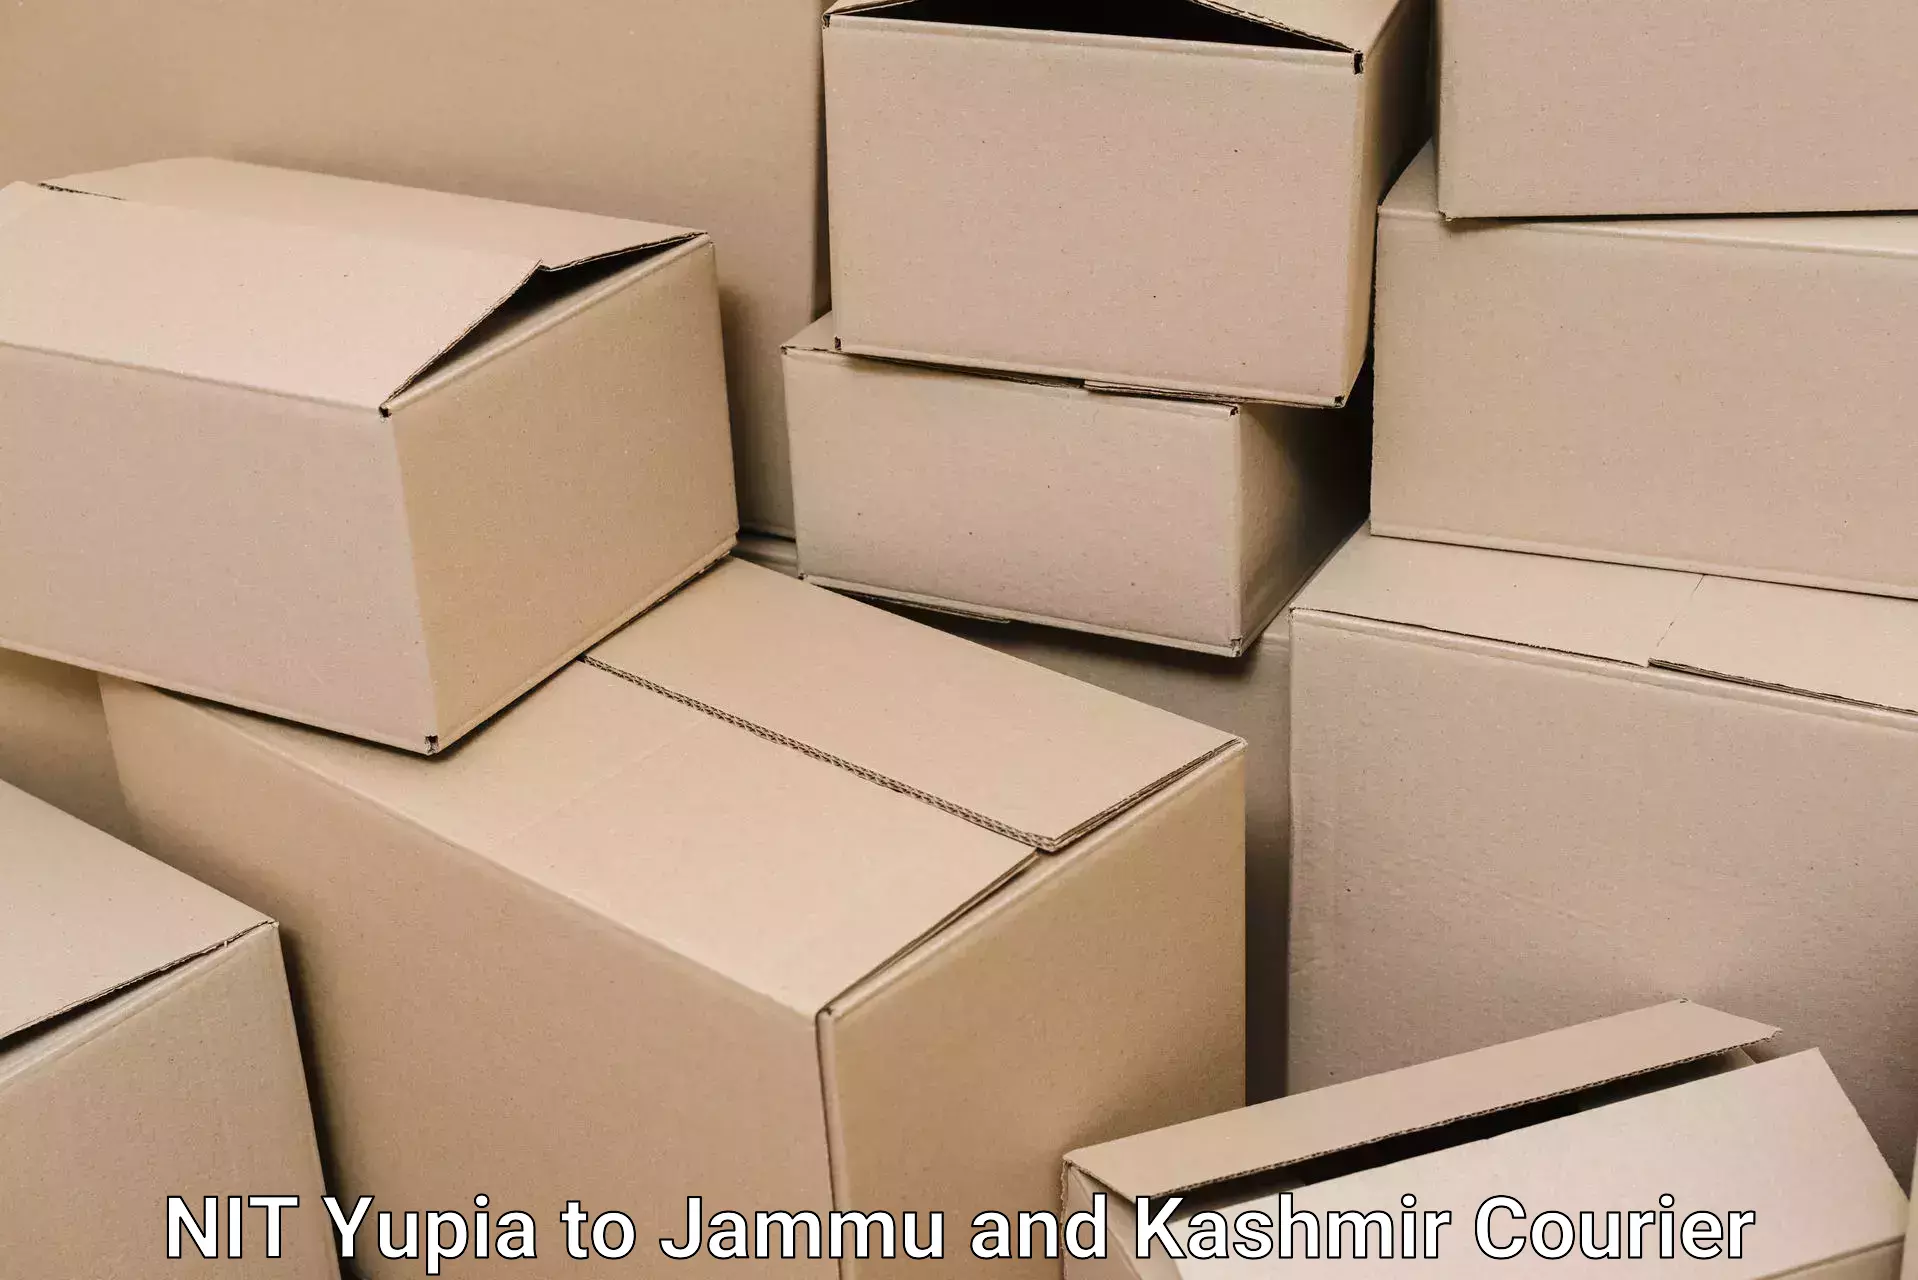 Reliable relocation services NIT Yupia to Jammu and Kashmir